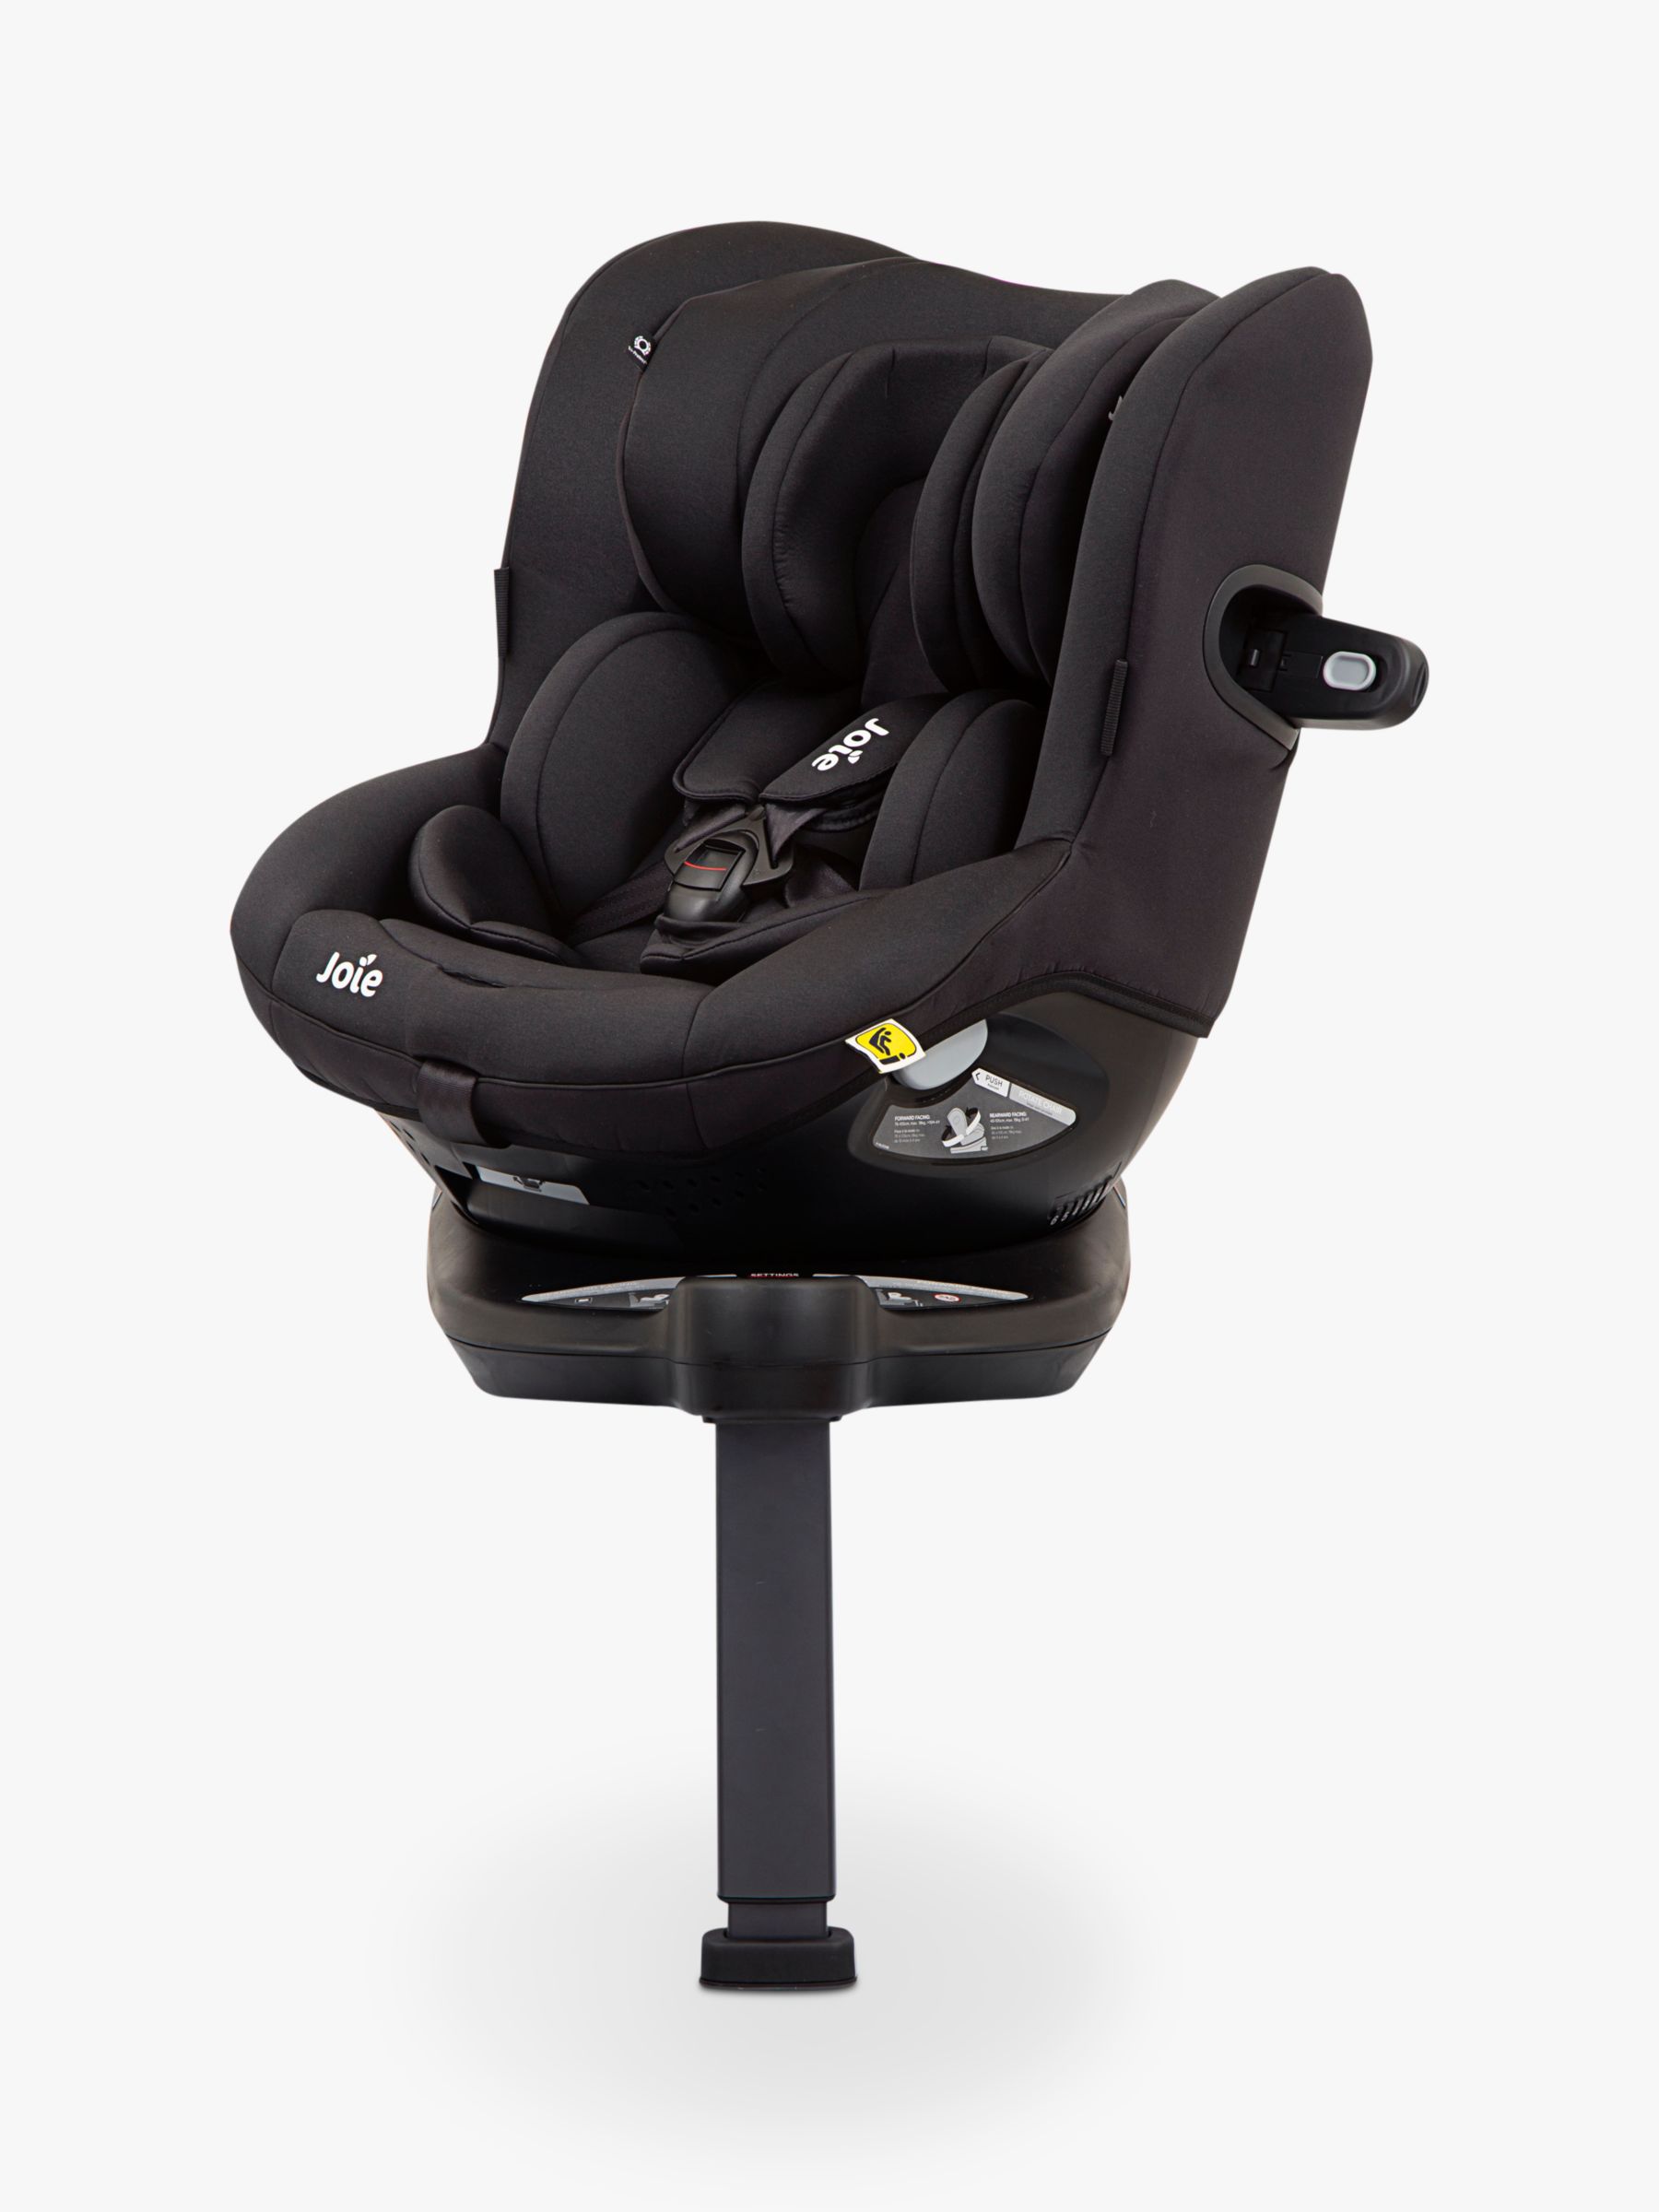 Joie Baby i-Spin 360 Group 0+/1 i-Size Car Seat, Coal at John Lewis ...